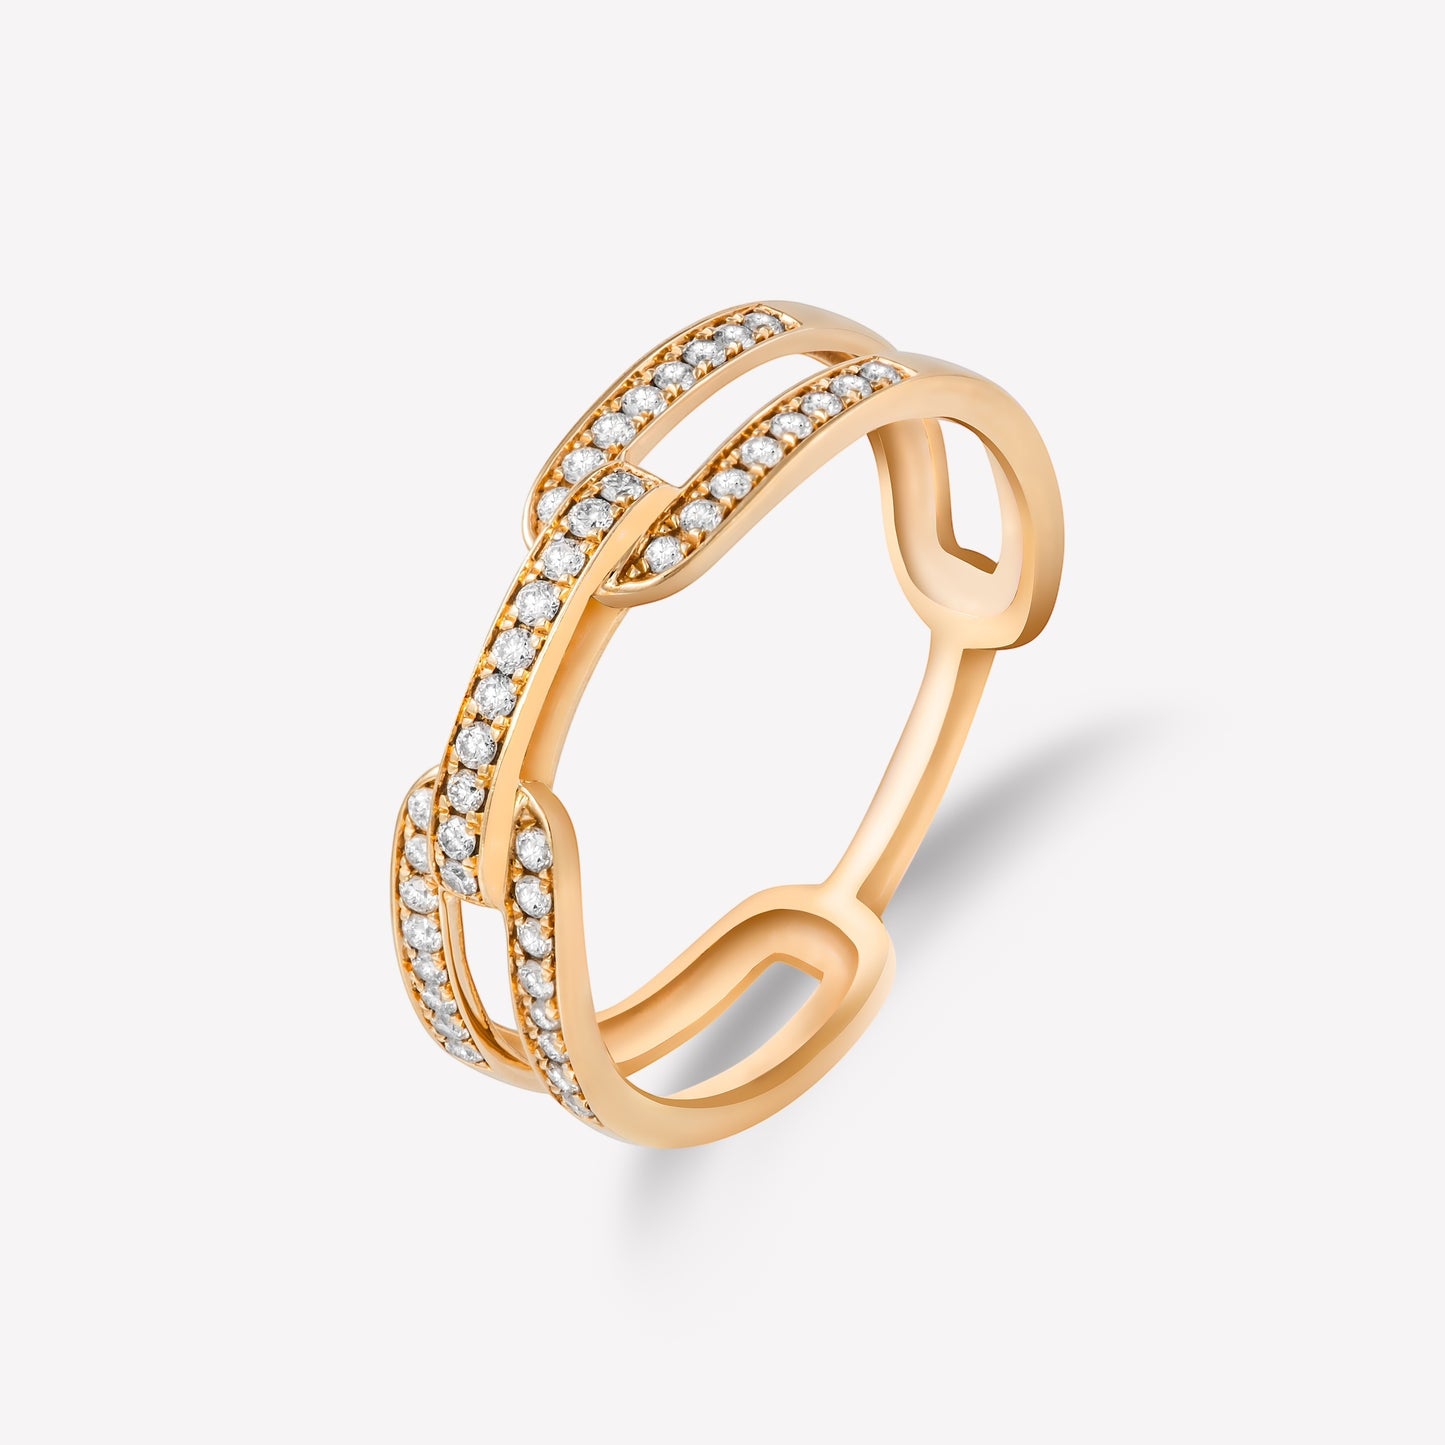 Links Deluxe Yellow Gold Diamond Ring